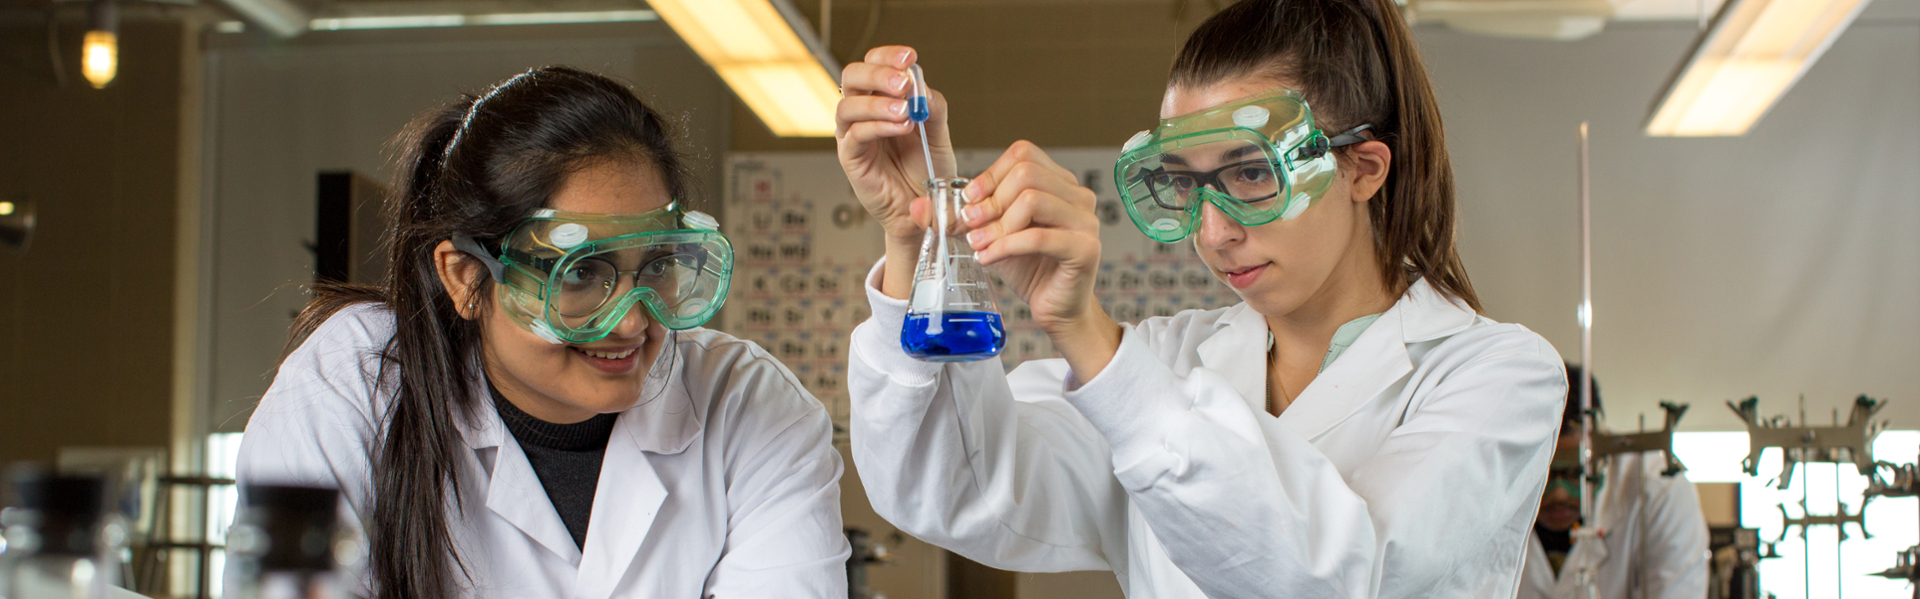 Two woman working in a chemistry lab